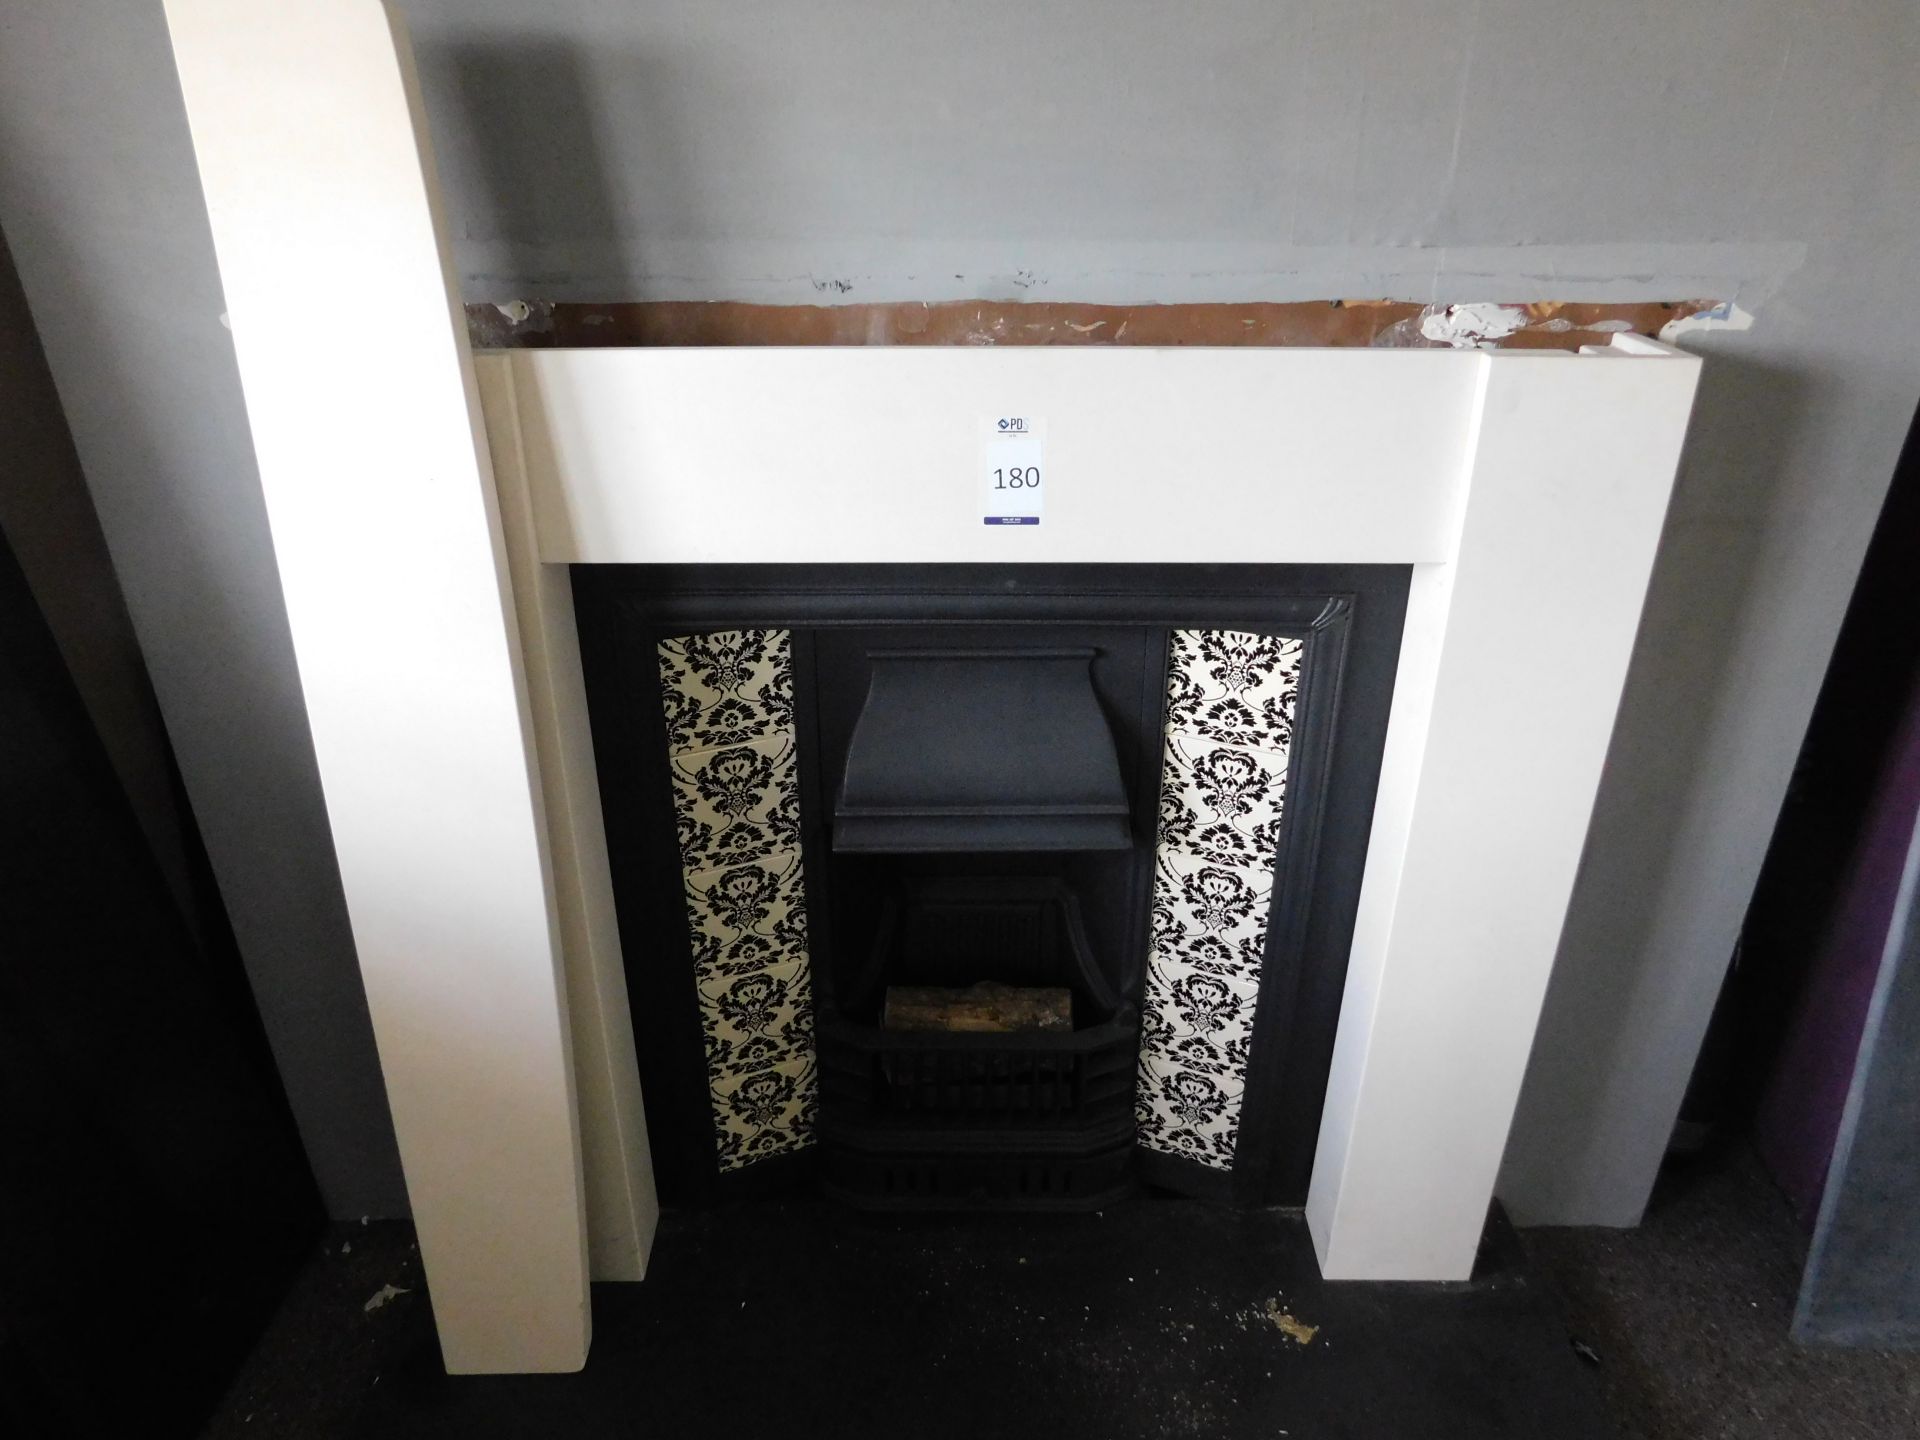 Ex-Display 54” Victorian Style Bedroom Fireplace with Marble Effect Surround (Where the company’s